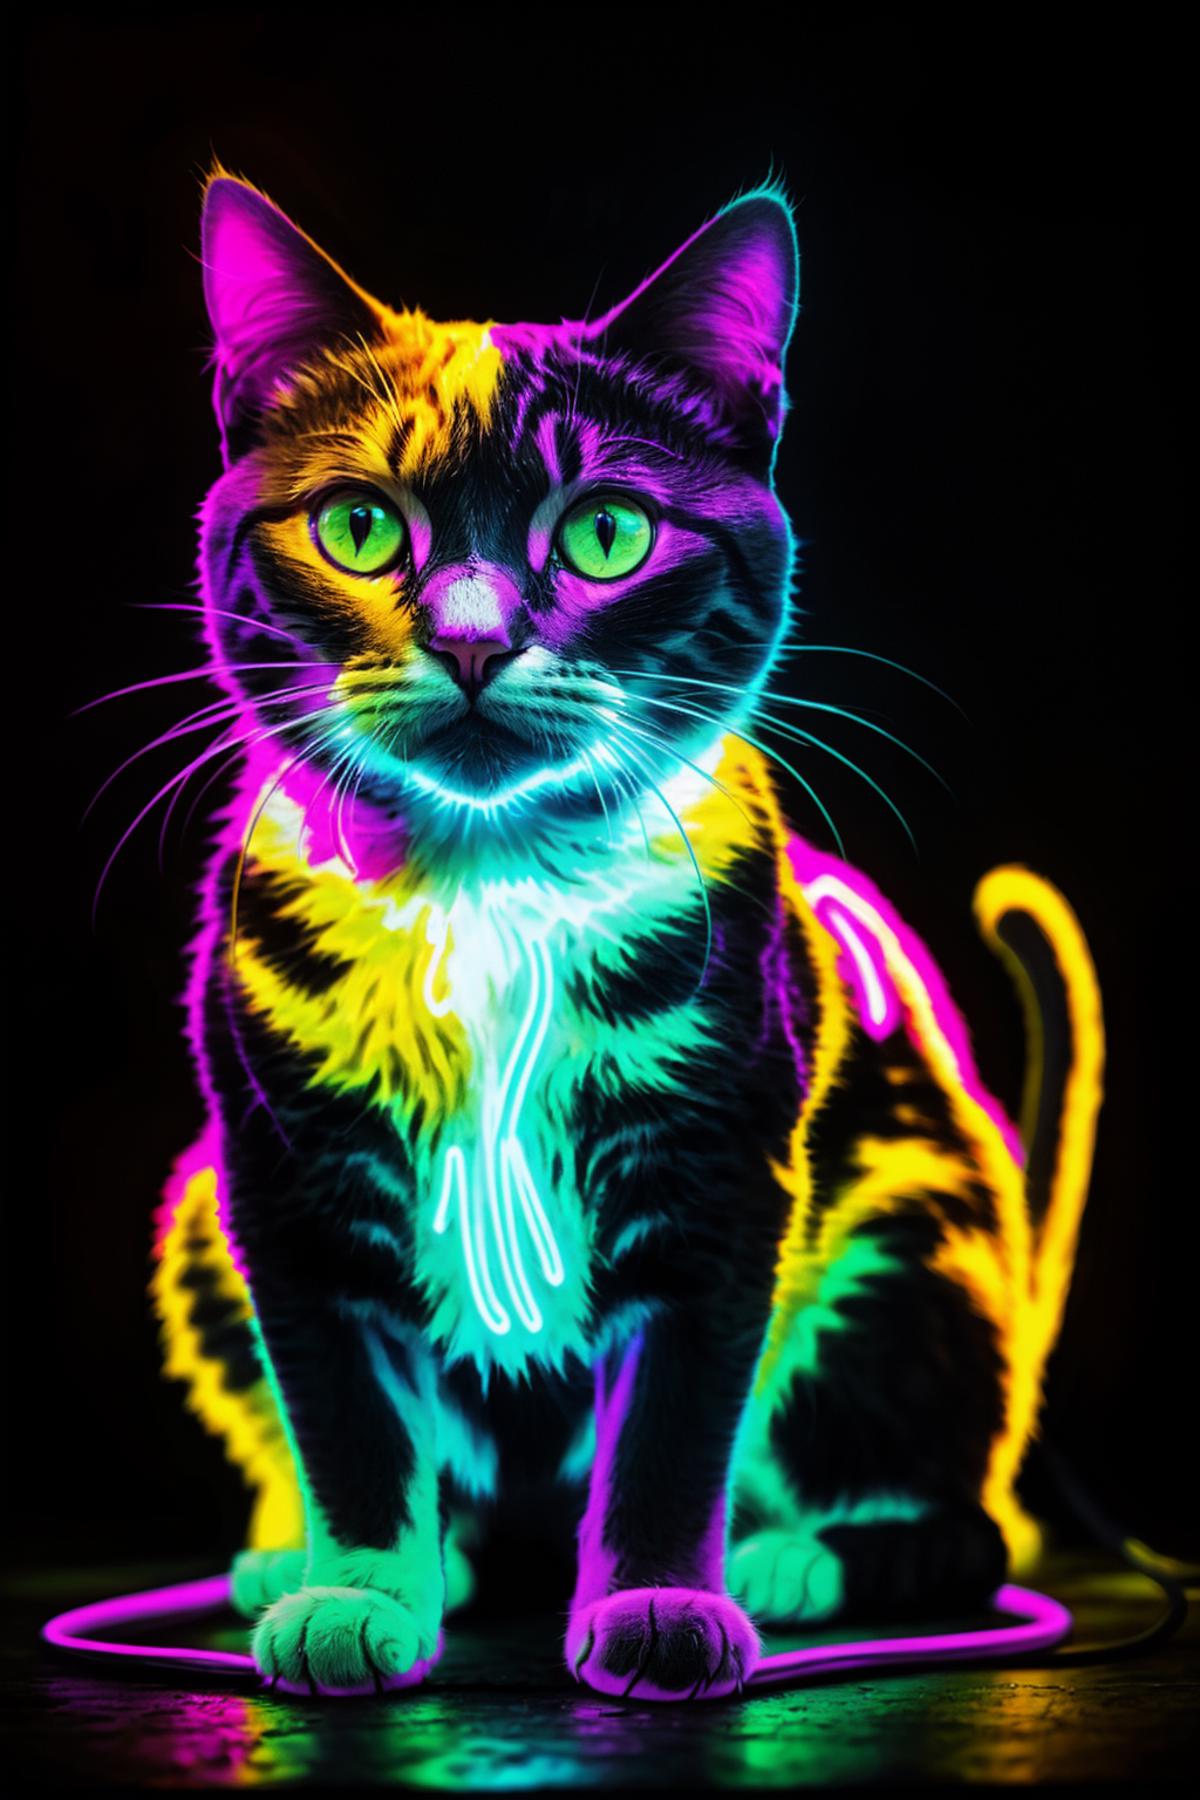 A neon-colored cat with green eyes and a purple nose.